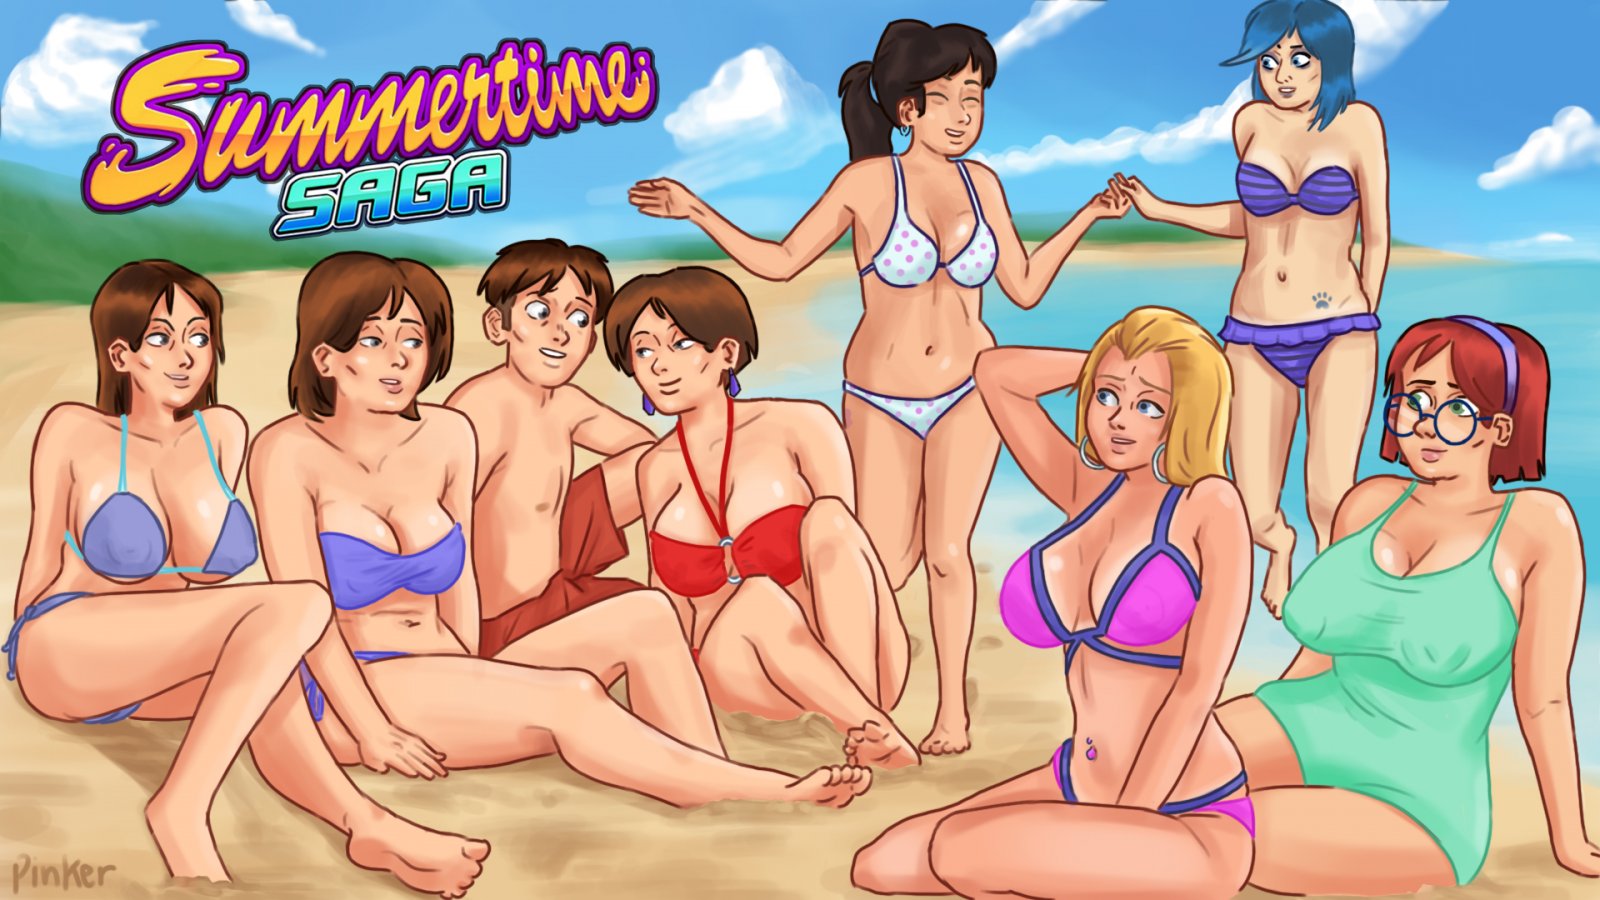 Here is the summertime saga sister quest. 